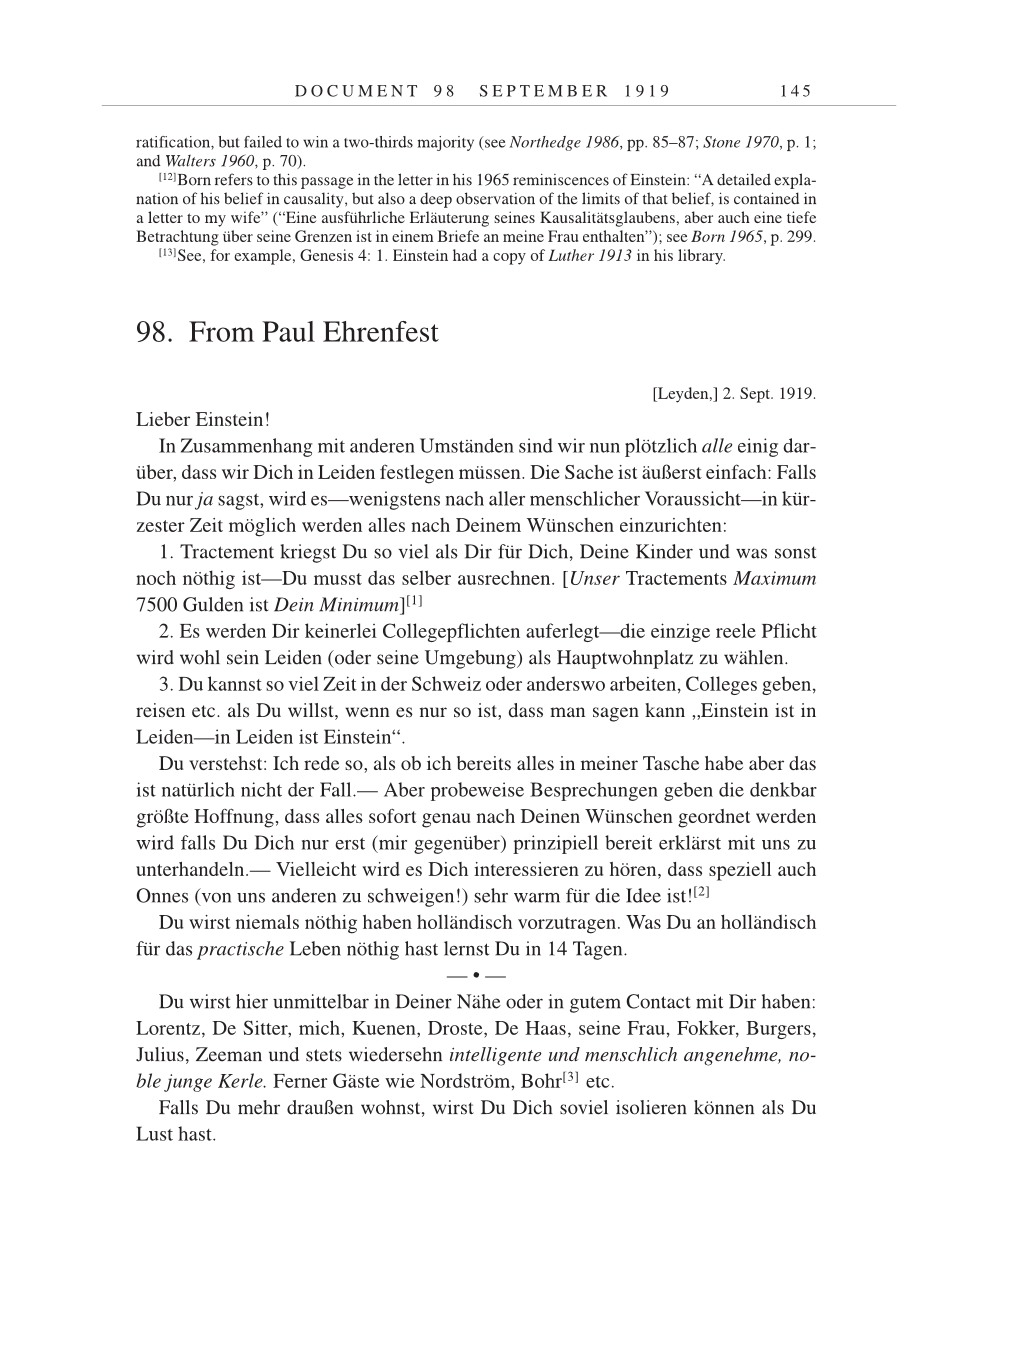 Volume 9: The Berlin Years: Correspondence January 1919-April 1920 page 145